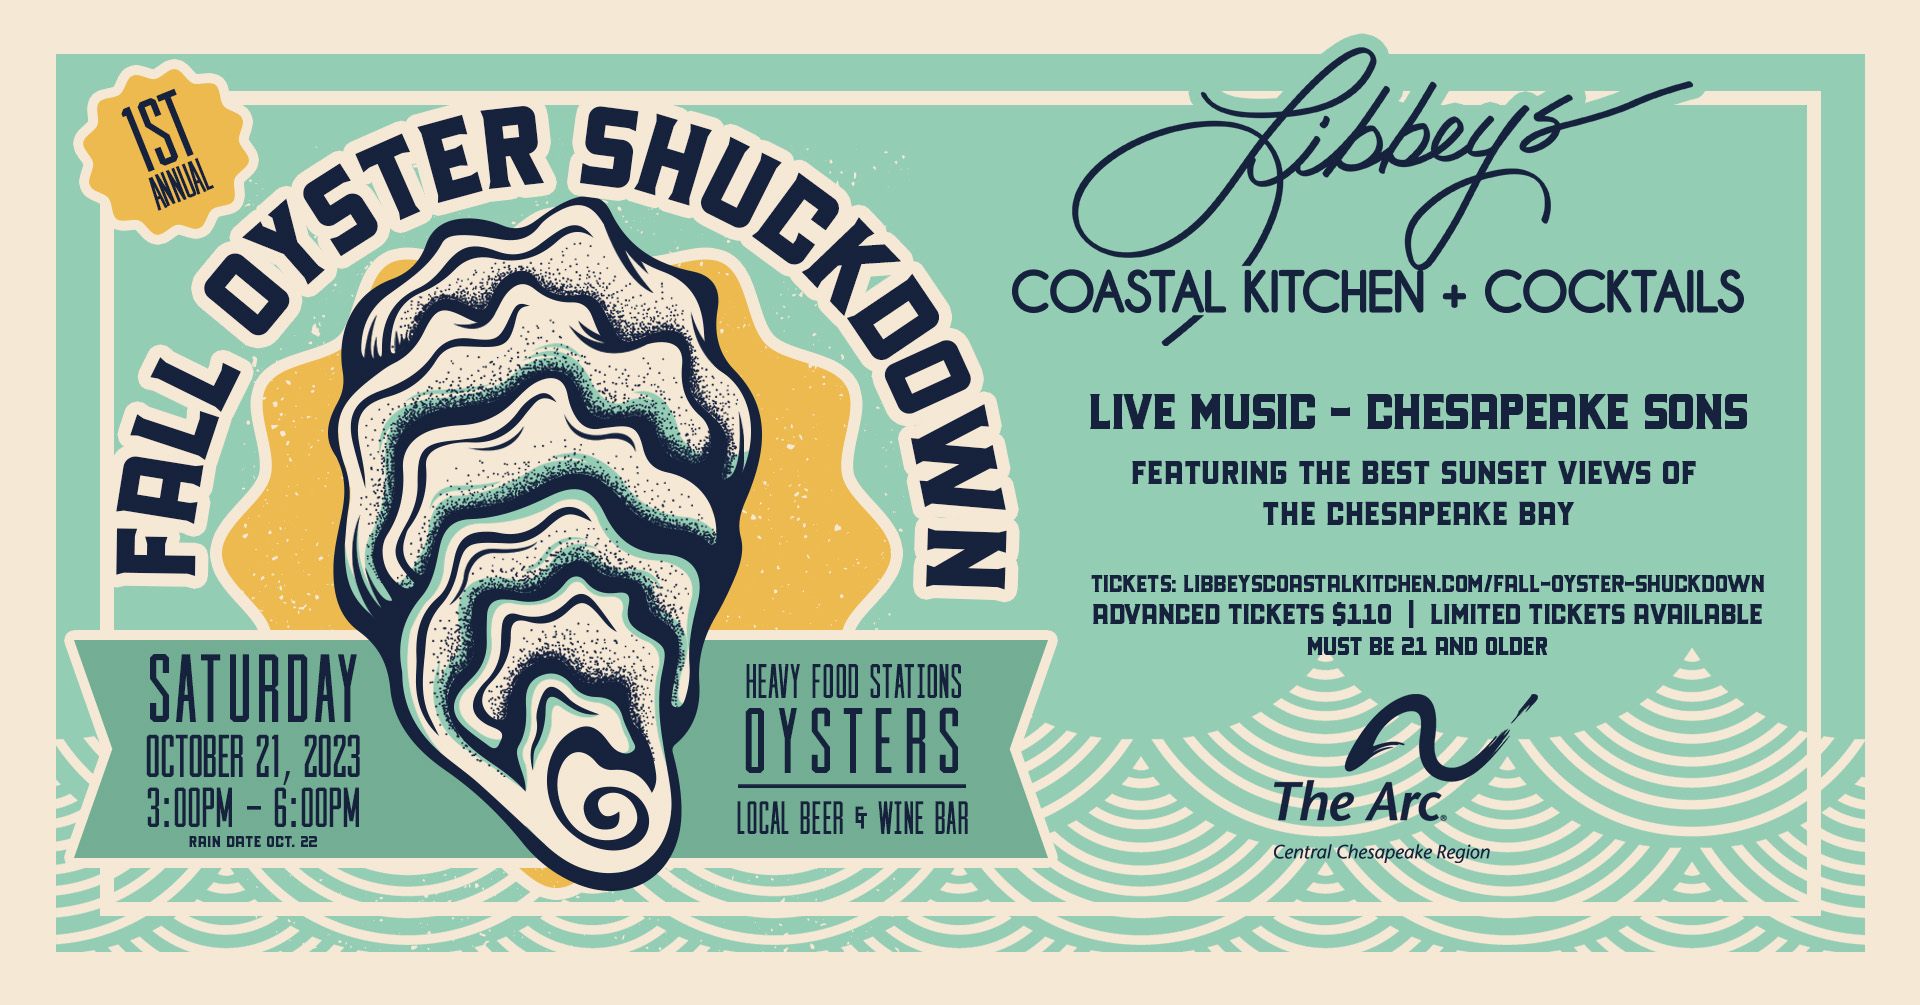 Libbey's-Fall-Oyster-Shuckdown-Event-Banner.jpg